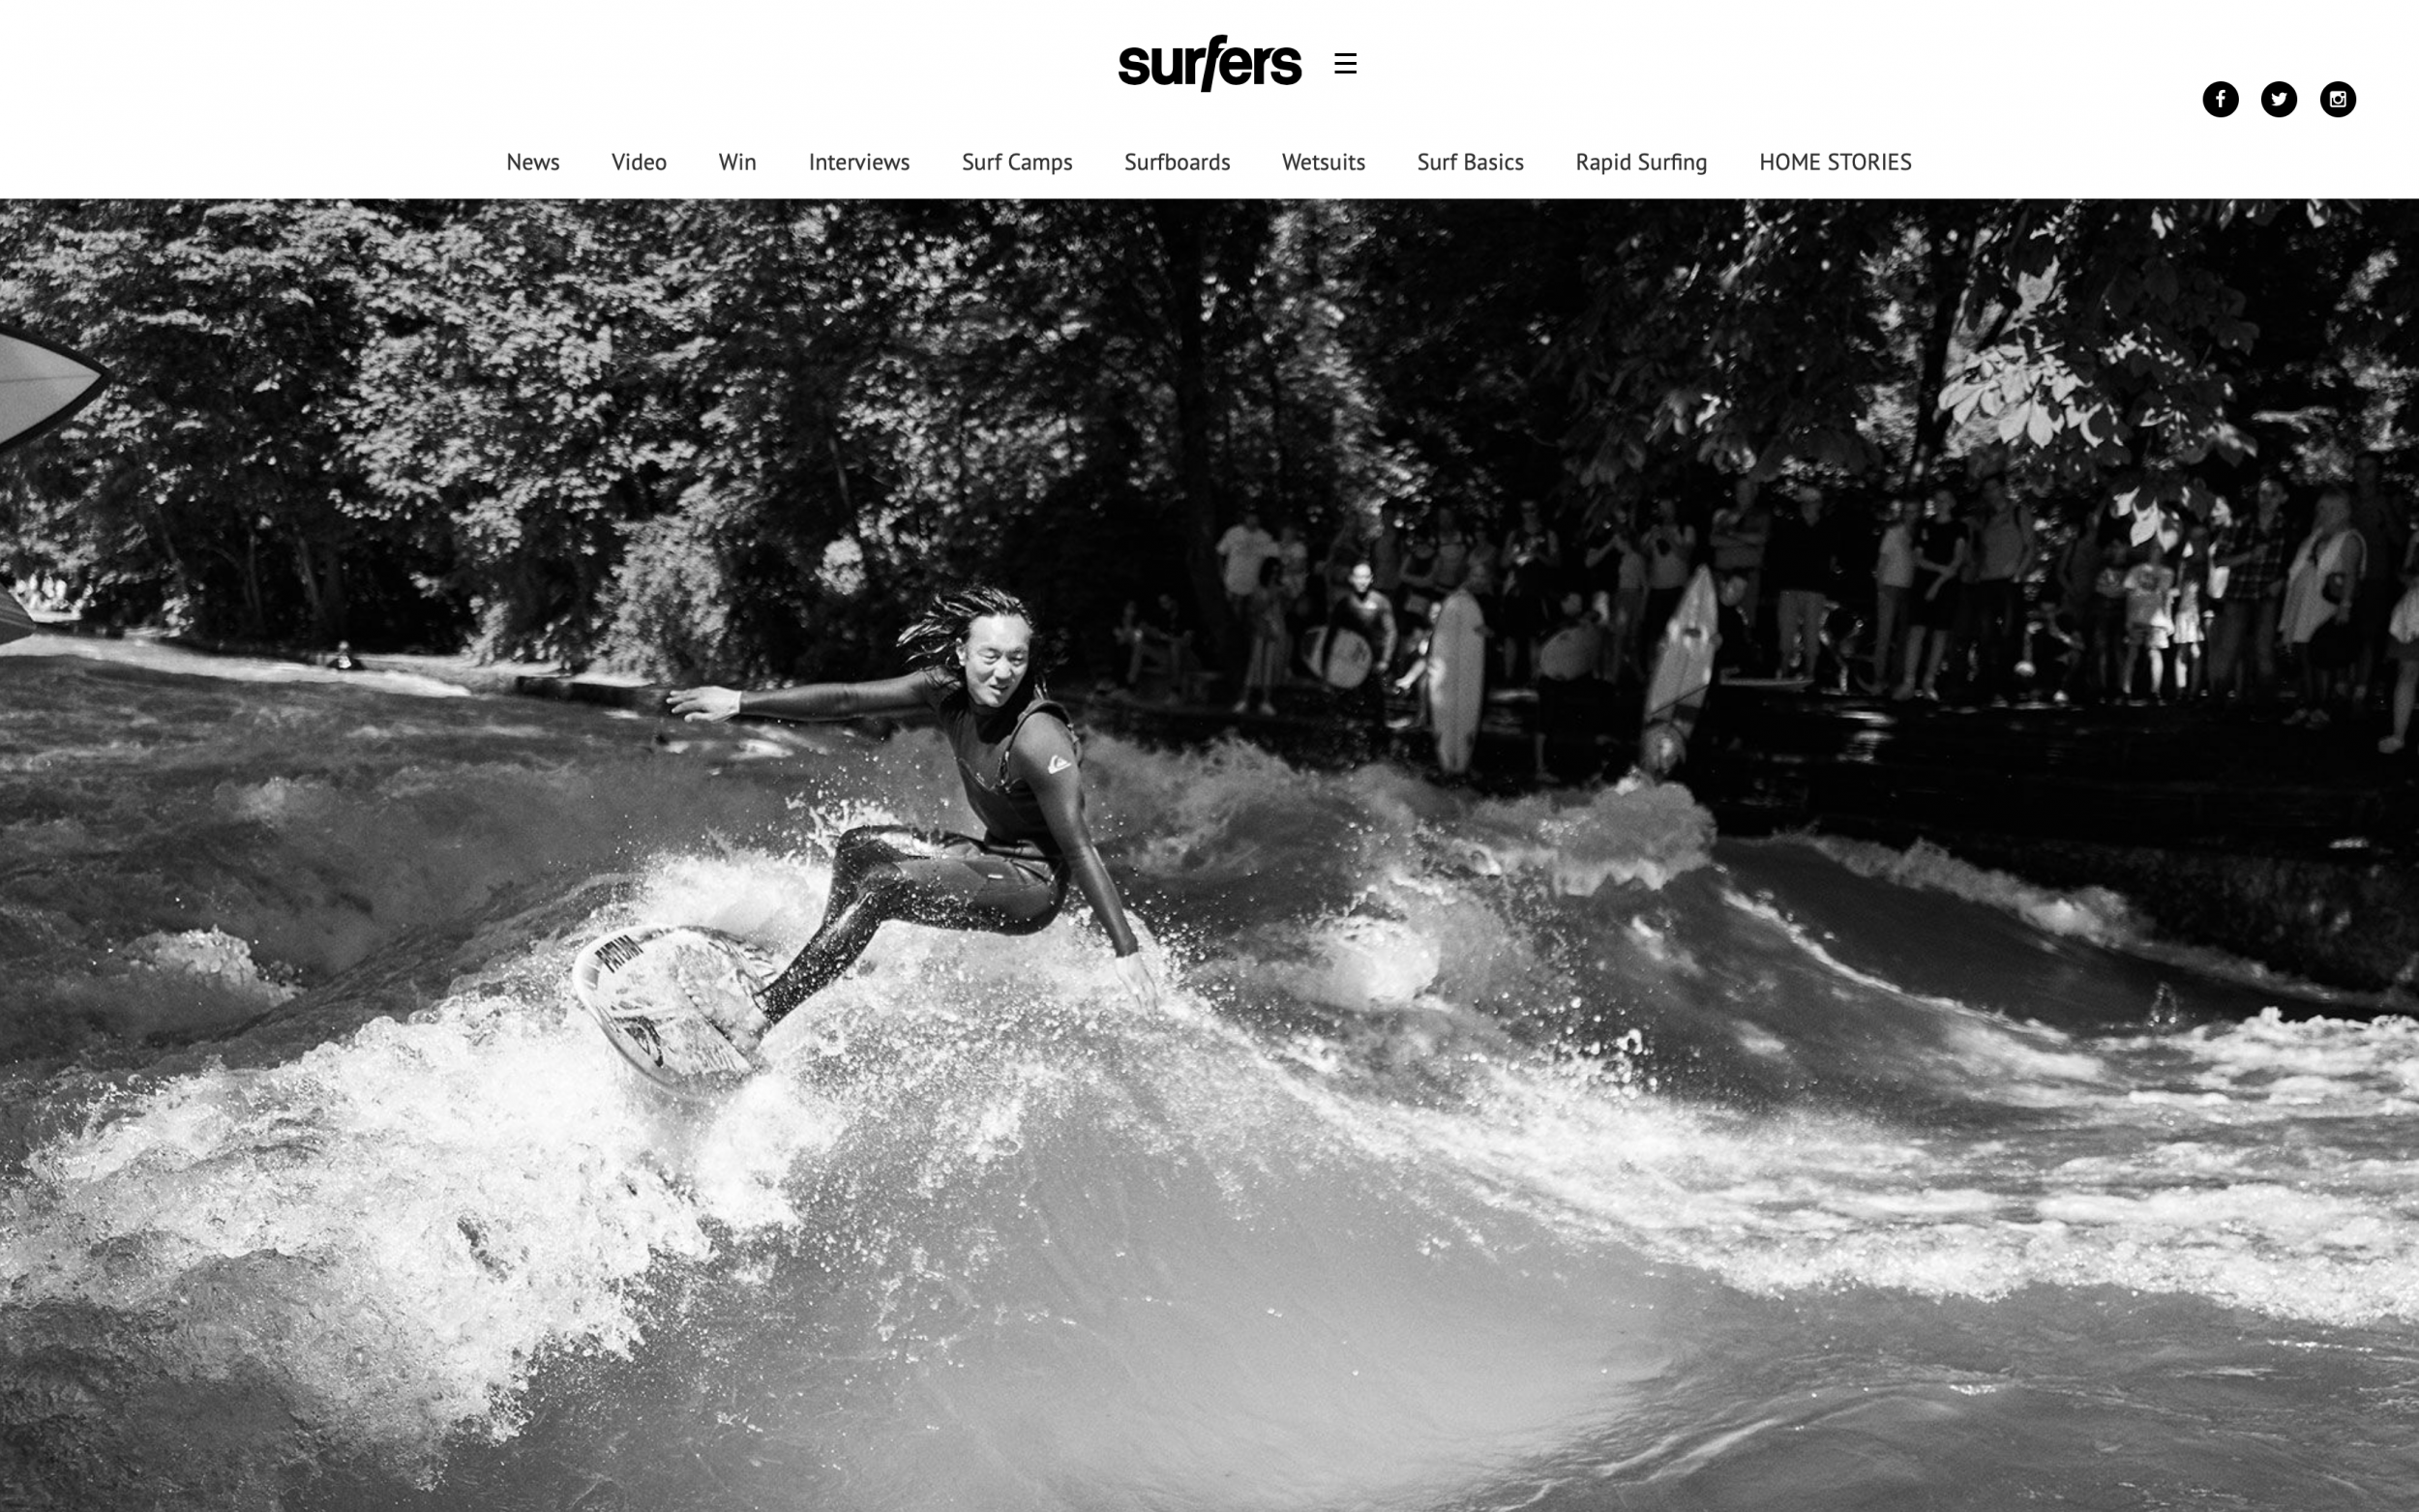 eisbach munich surfers magazine (2 images) by Mike Meyer Photography